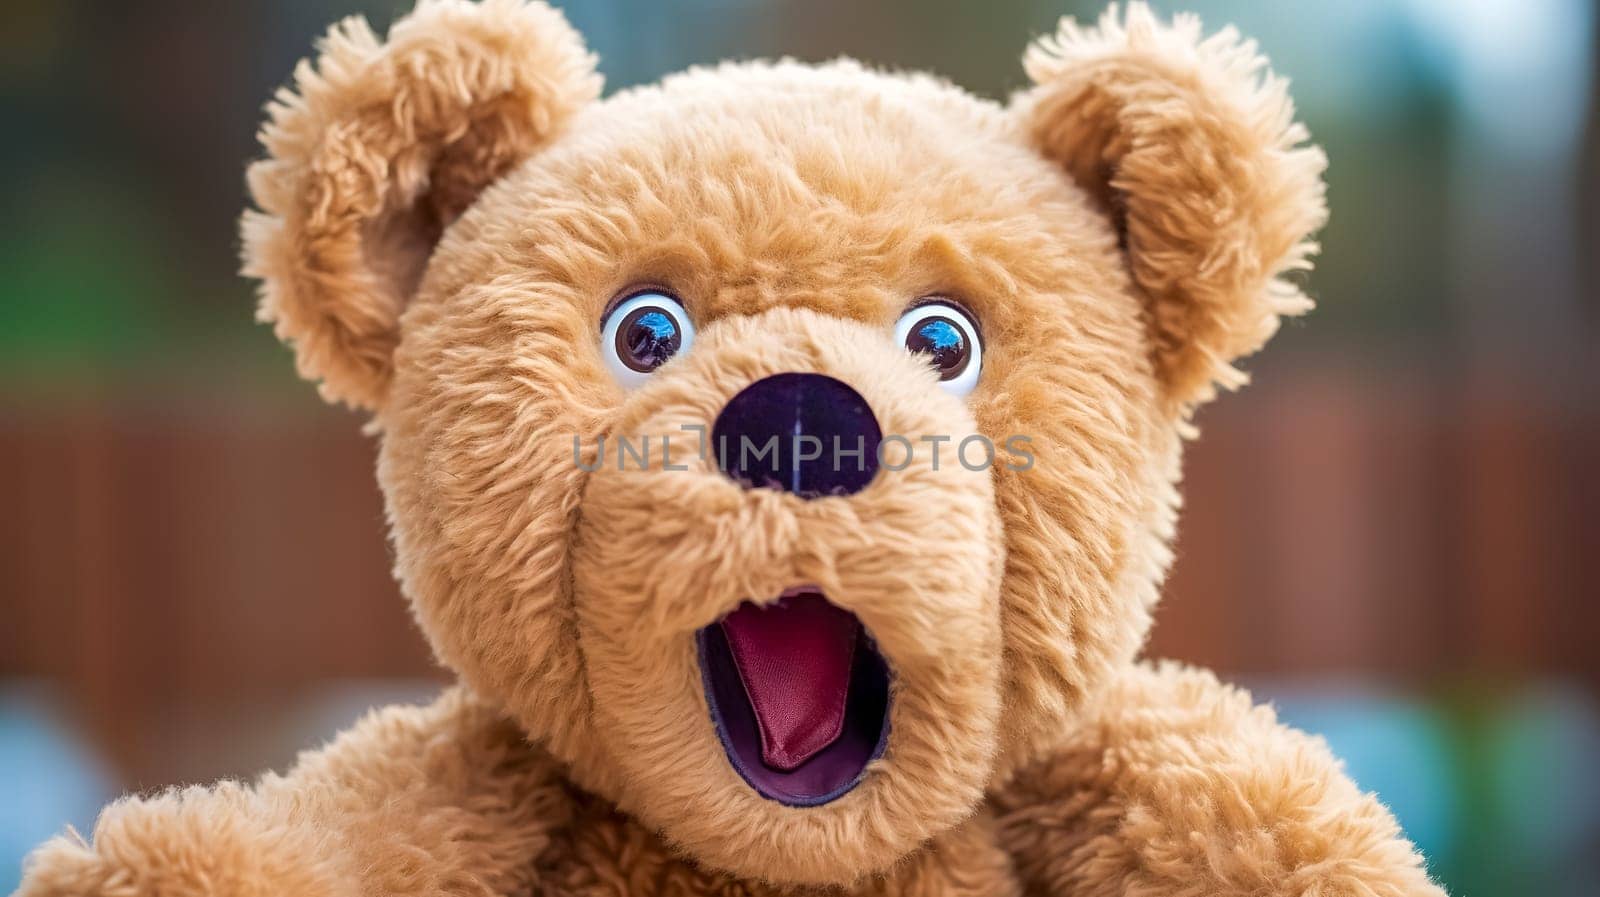 teddy bear with a surprised expression, its mouth wide open, and its eyes wide and bright against a blurred background